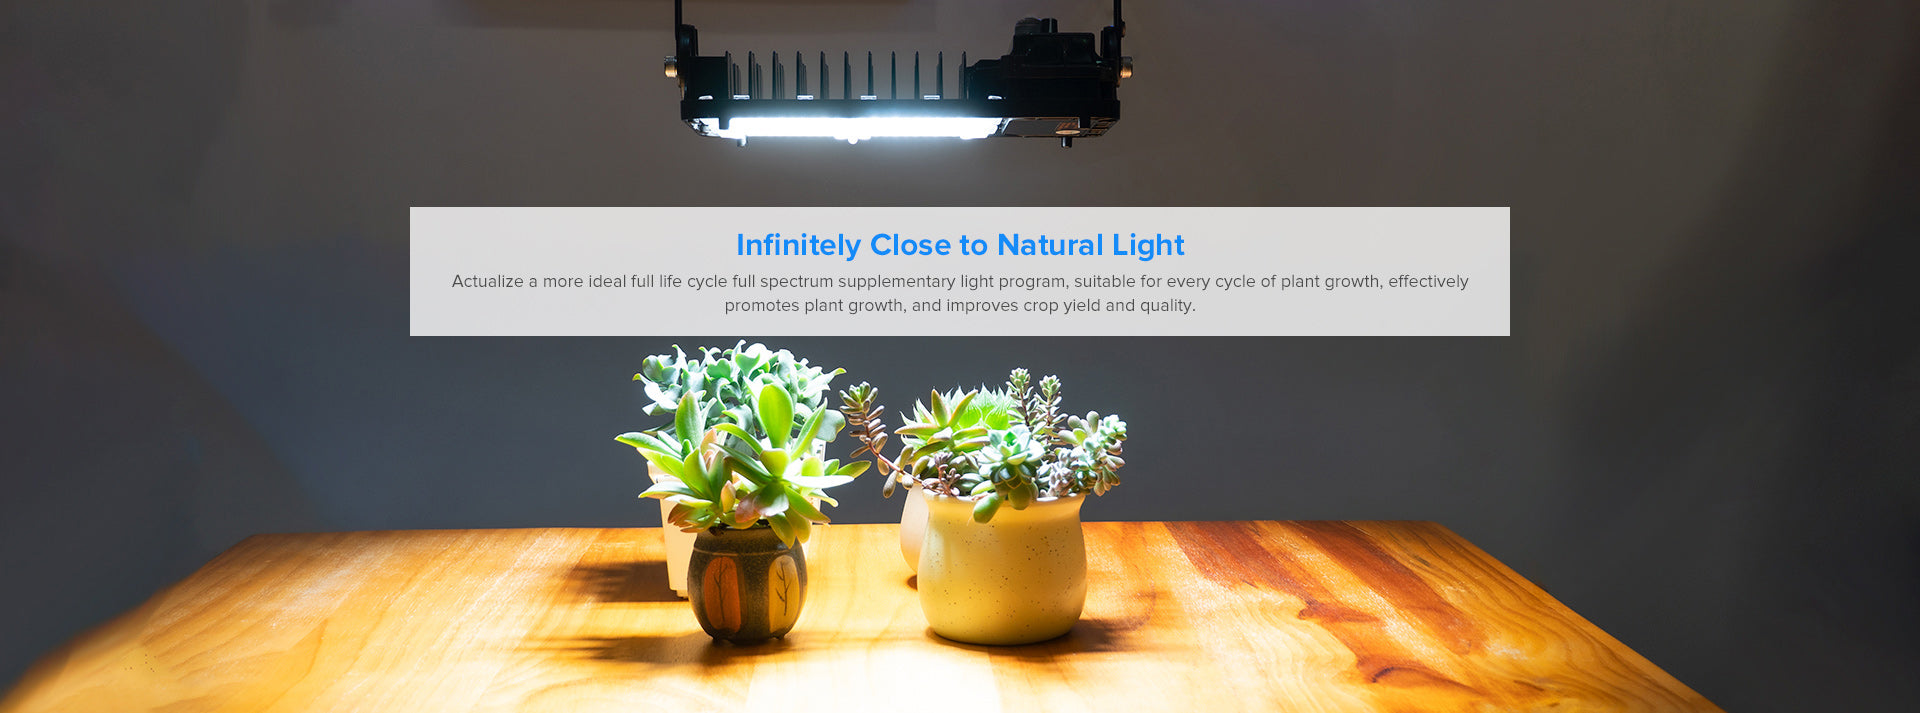 Dimmable 100W LED Grow Light，infinitely Close to Natural Light： Actualize a more ideal ful life cycle full spectrum supplementary light program, suitable for every cycle of plant growth, effectively promotes plant growth, and improves crop yield and quality.